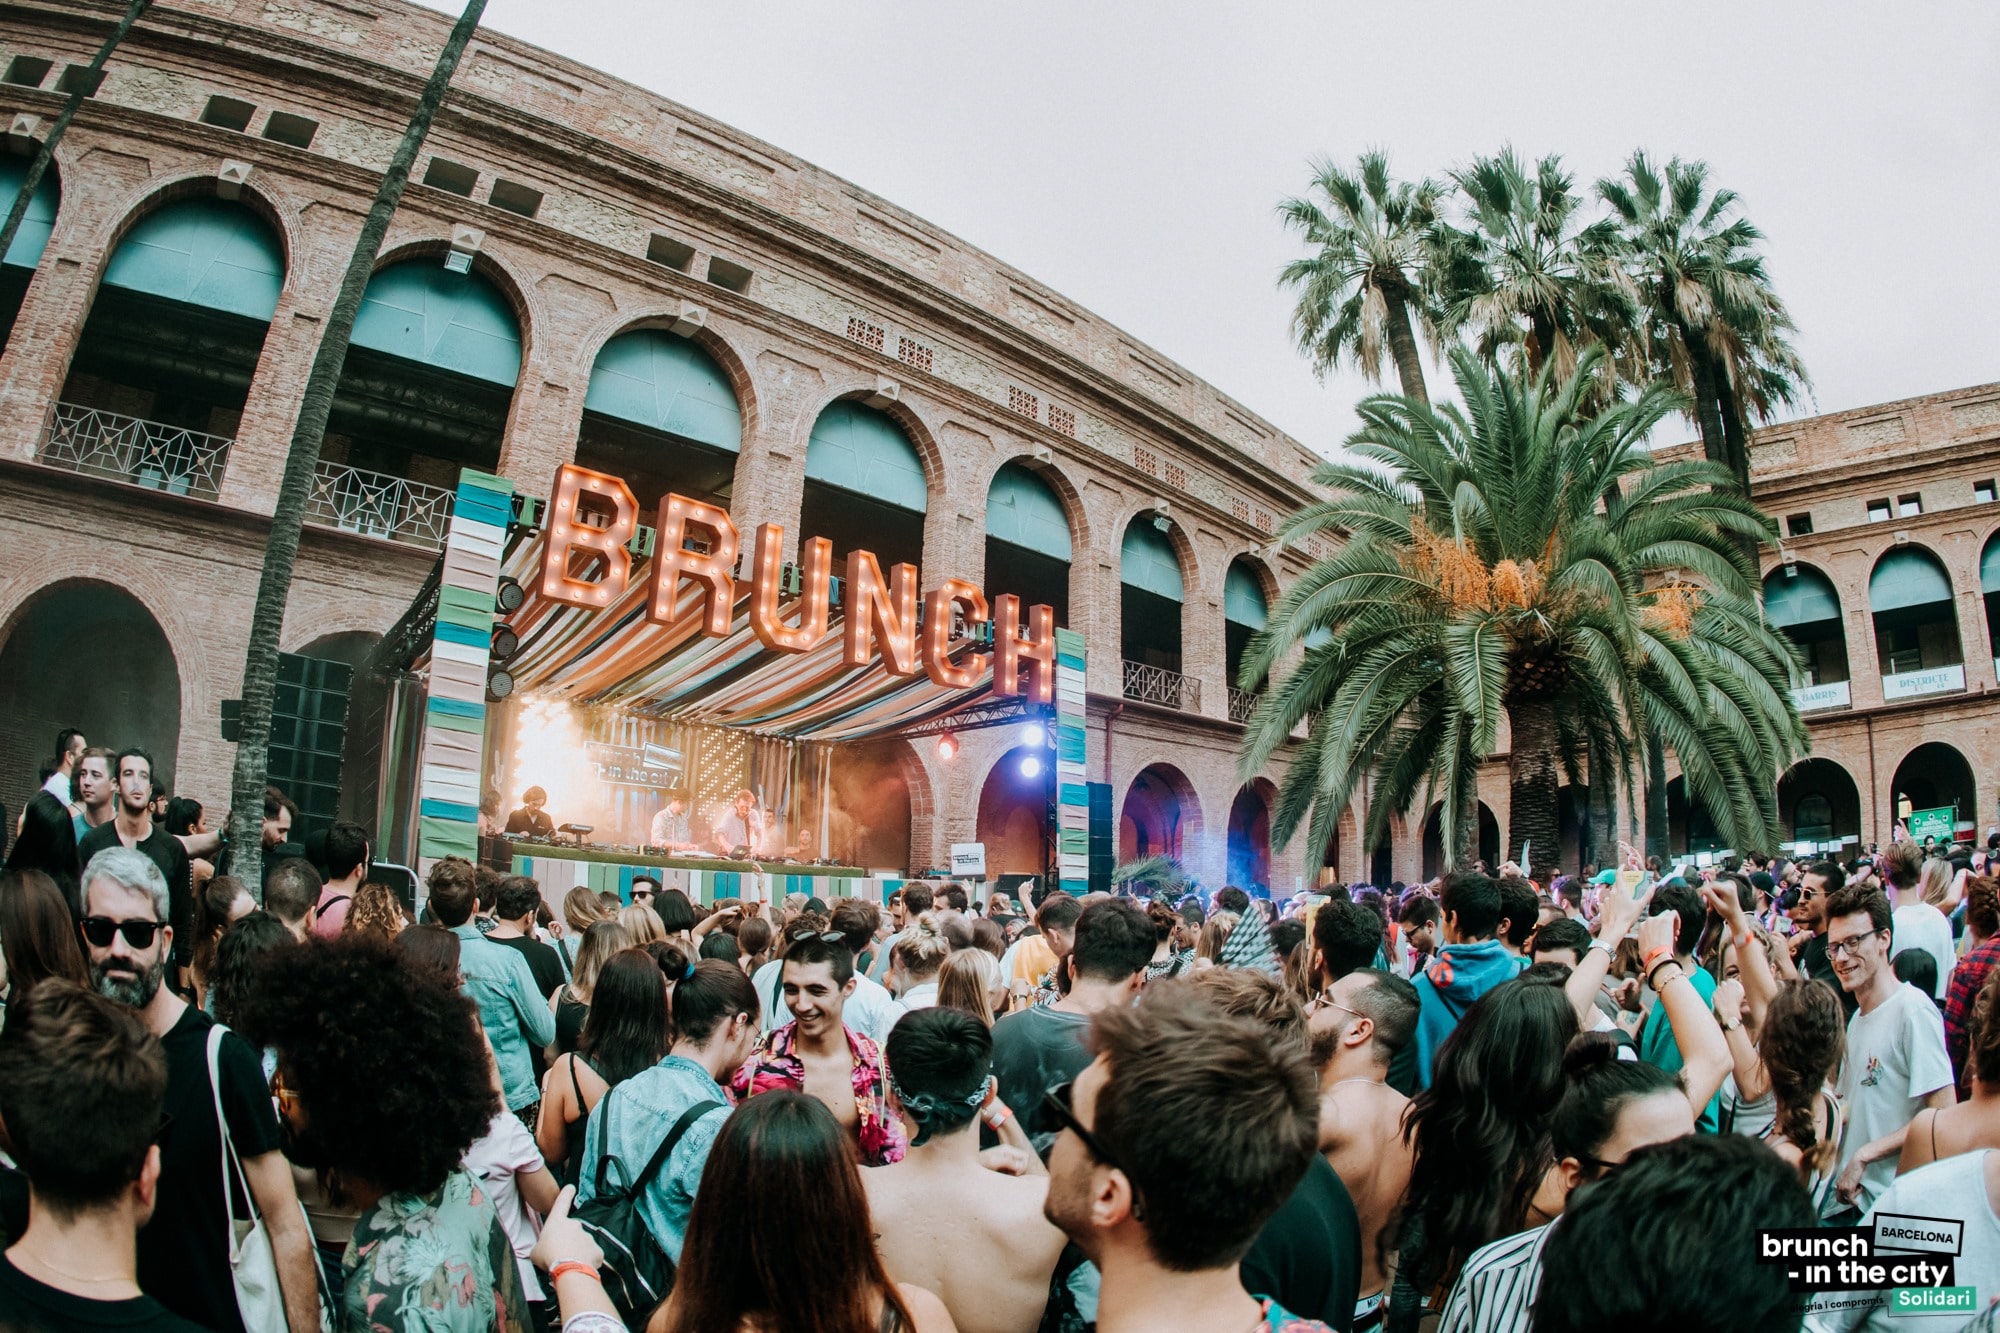 Thousands dancing during the one-day techno and electronic music festival Brunch in the City (photo courtesy of Brunch in the City)